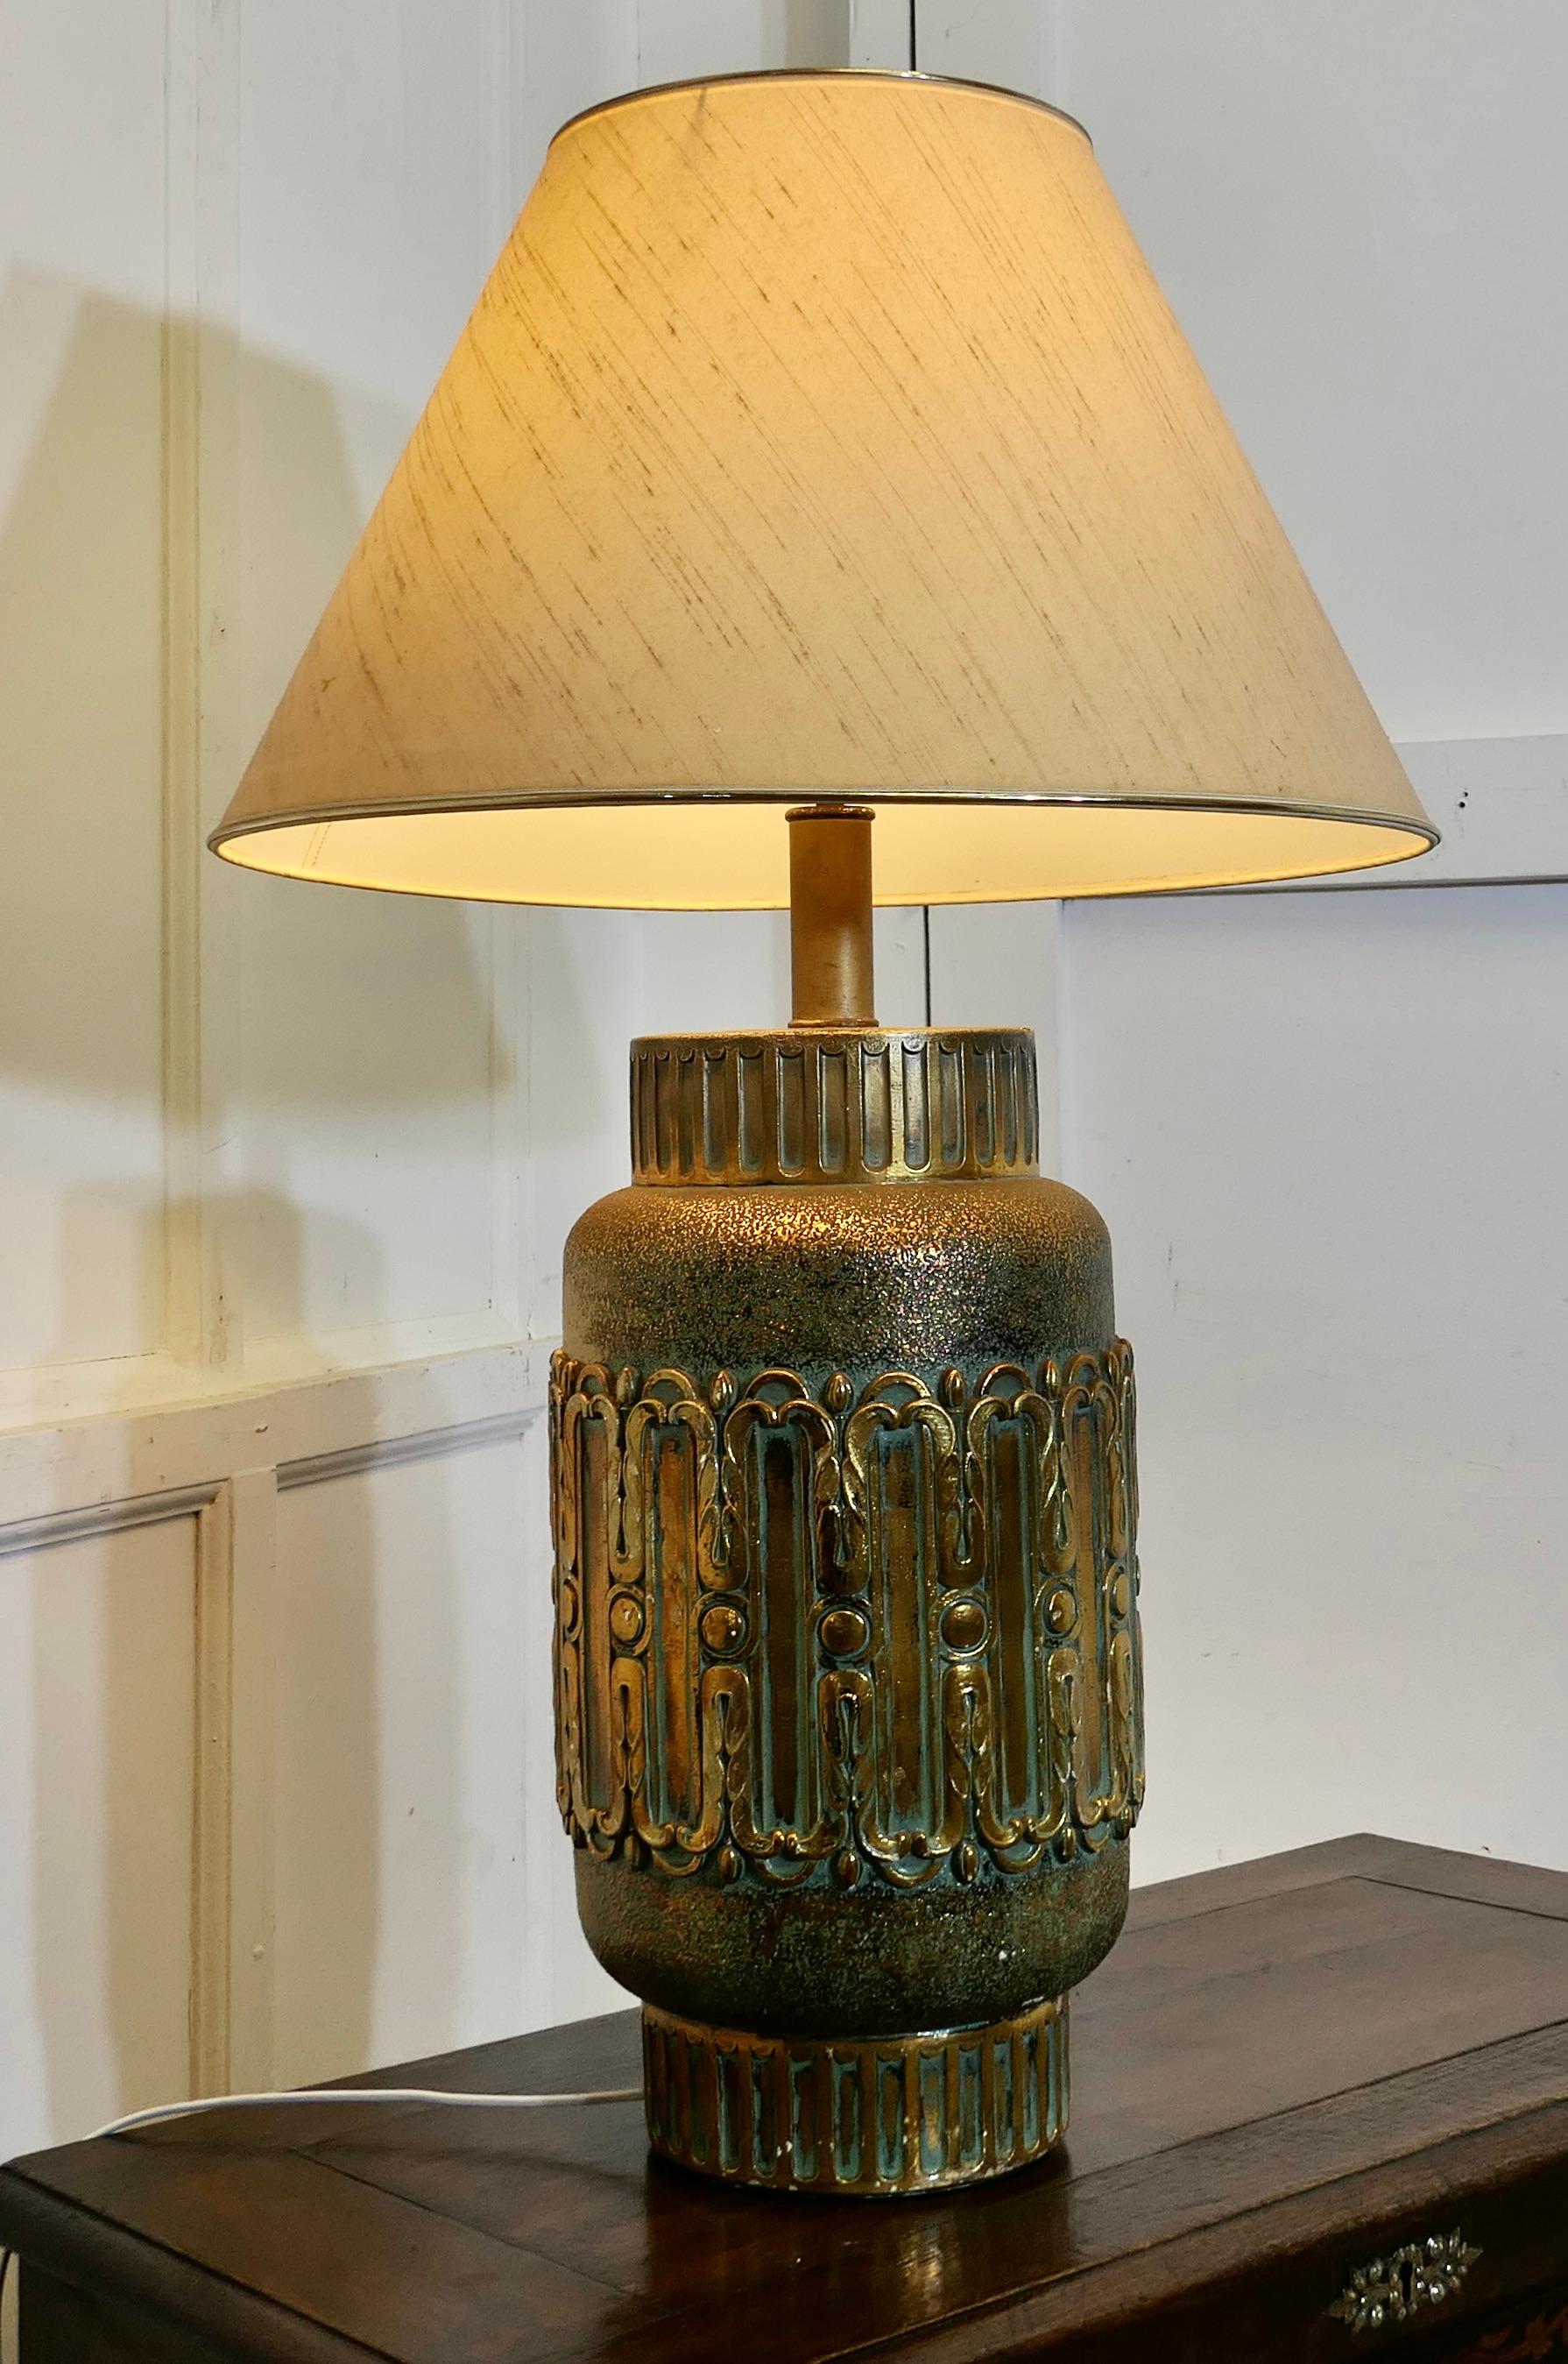 Large Bulbous Simulated Brass Ceramic Vase Lamp    In Good Condition For Sale In Chillerton, Isle of Wight